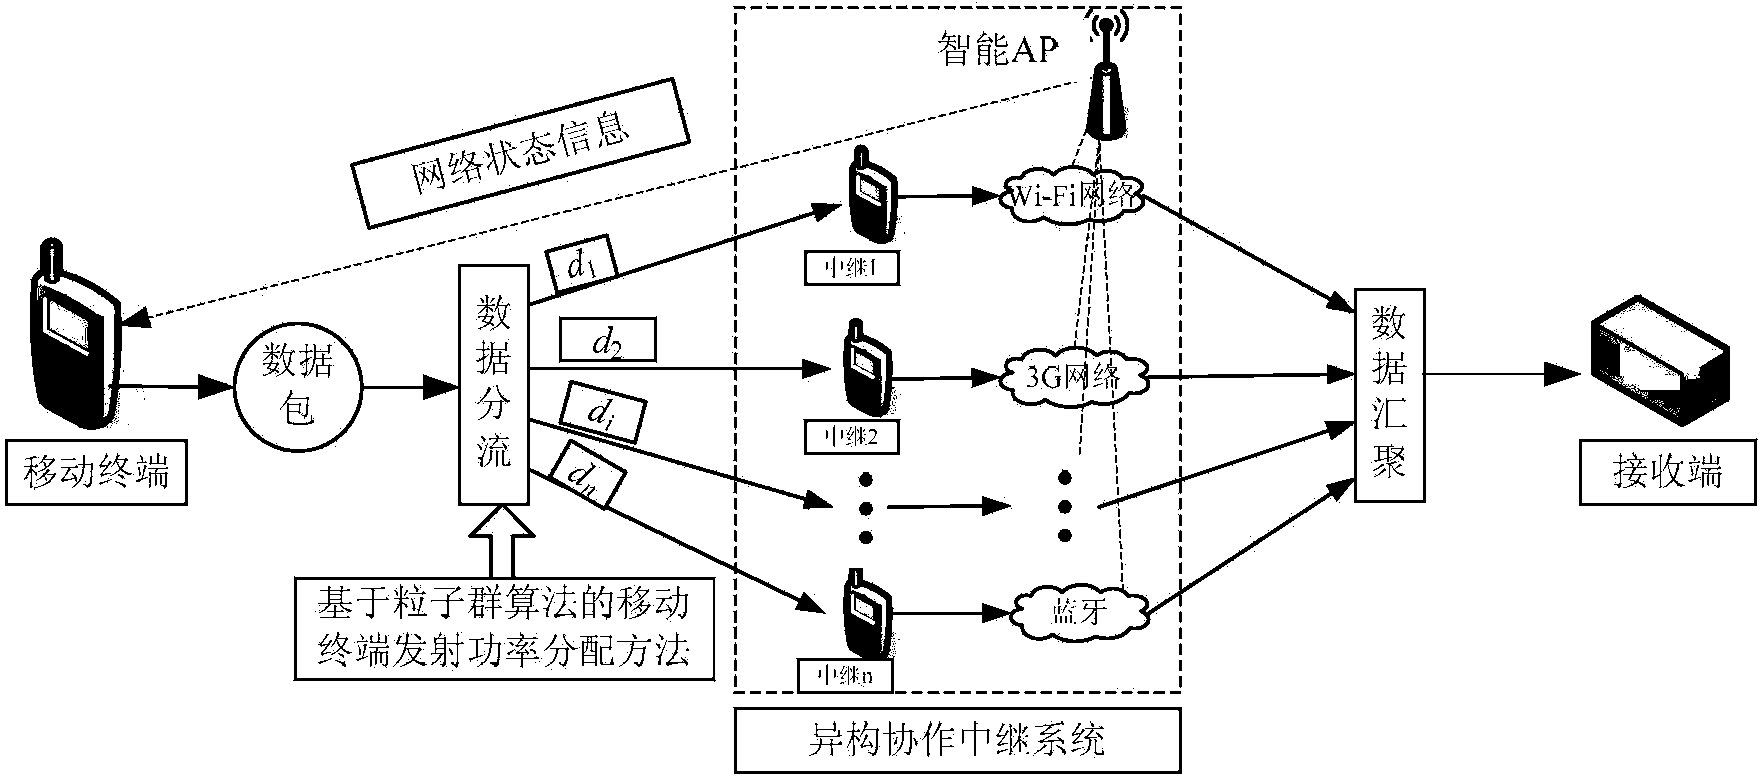 Mobile terminal power distribution method in heterogeneous wireless network cooperative communication system